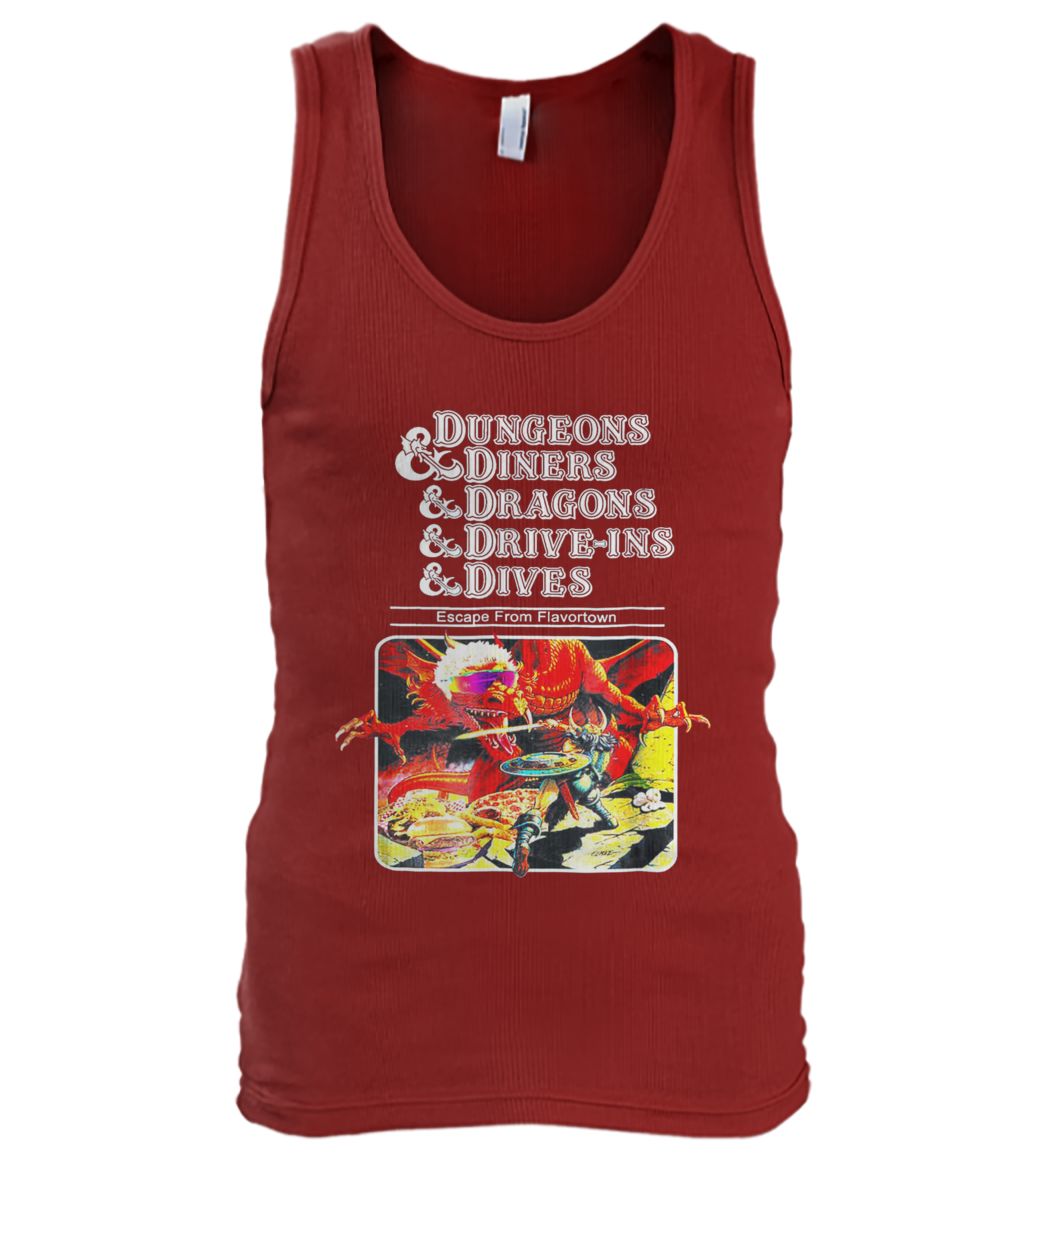 Dungeons and diners dragons drive-ins dives slightly men's tank top